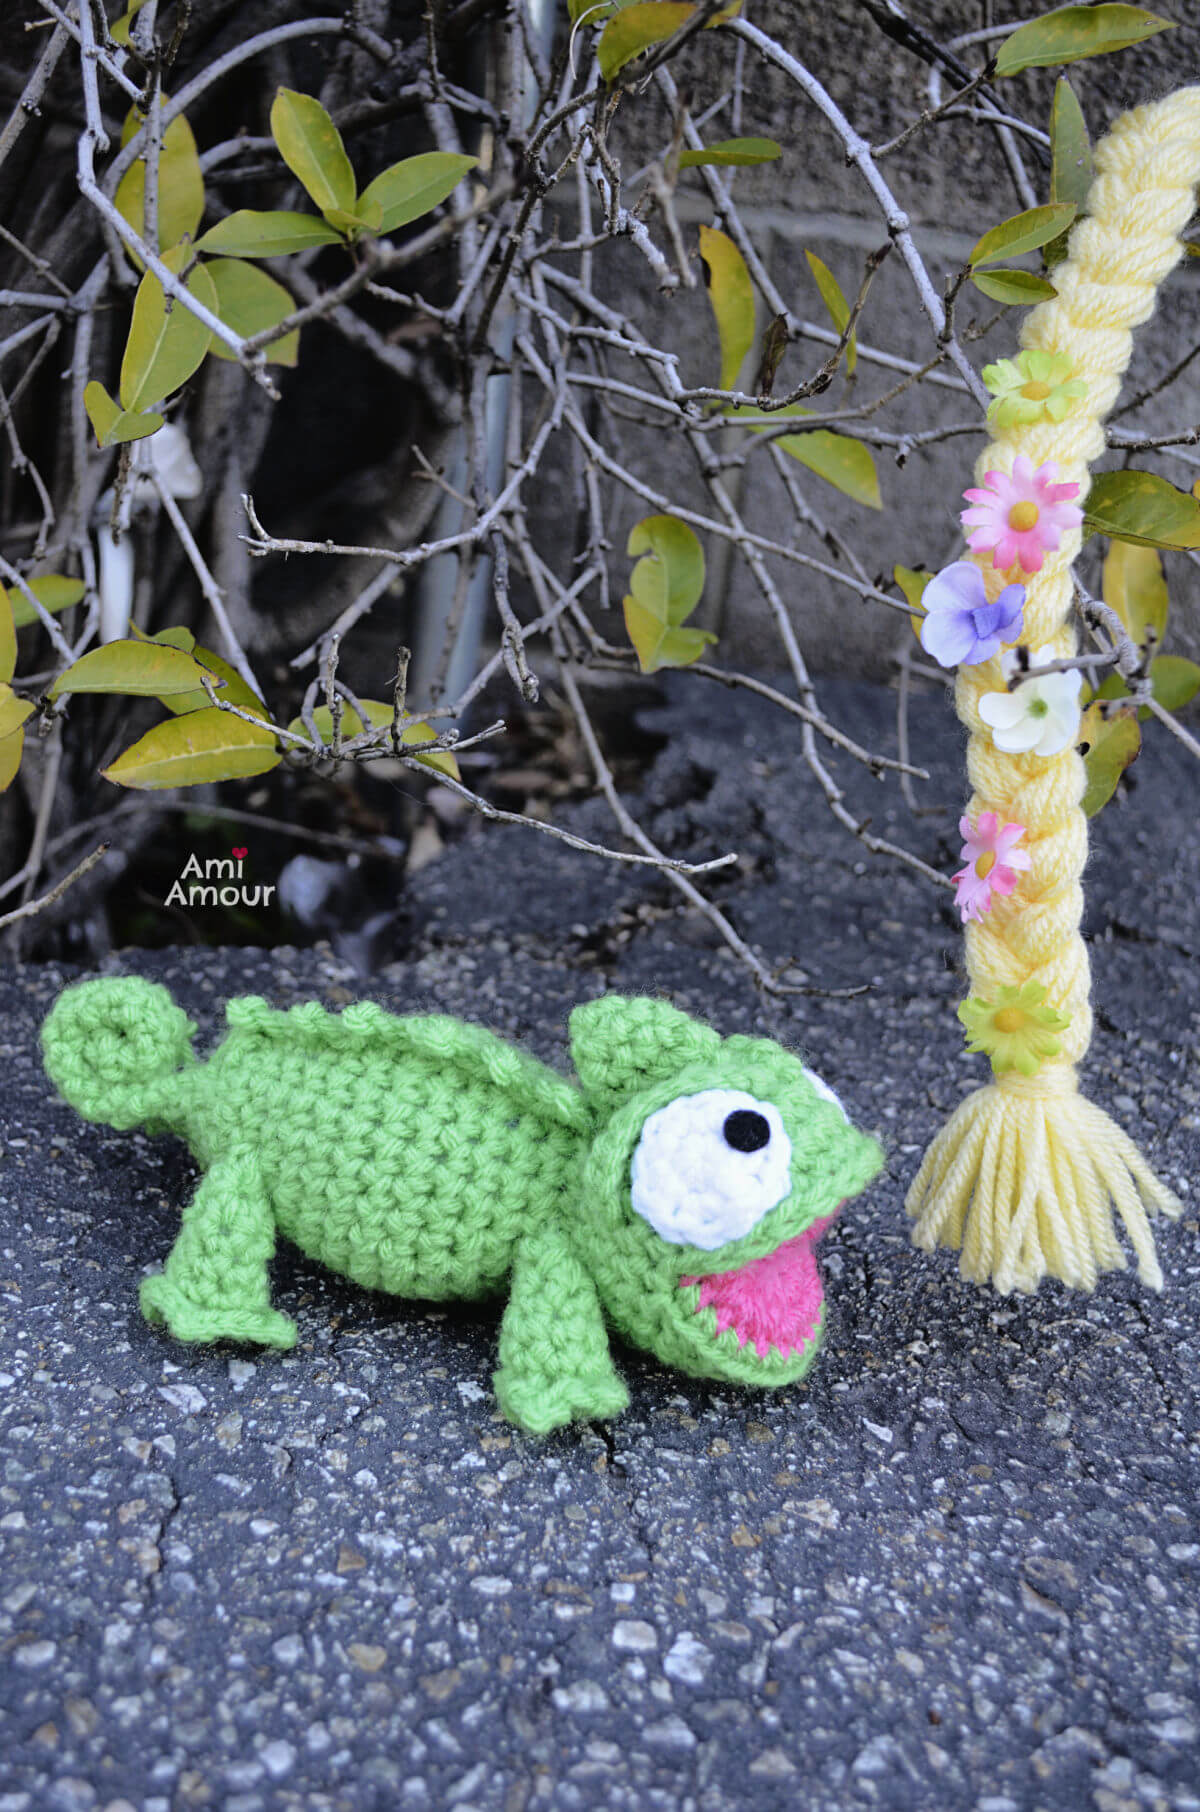 Handmade Crochet Pascal in Forest with Rapunzel Braided Hair full of Flowers